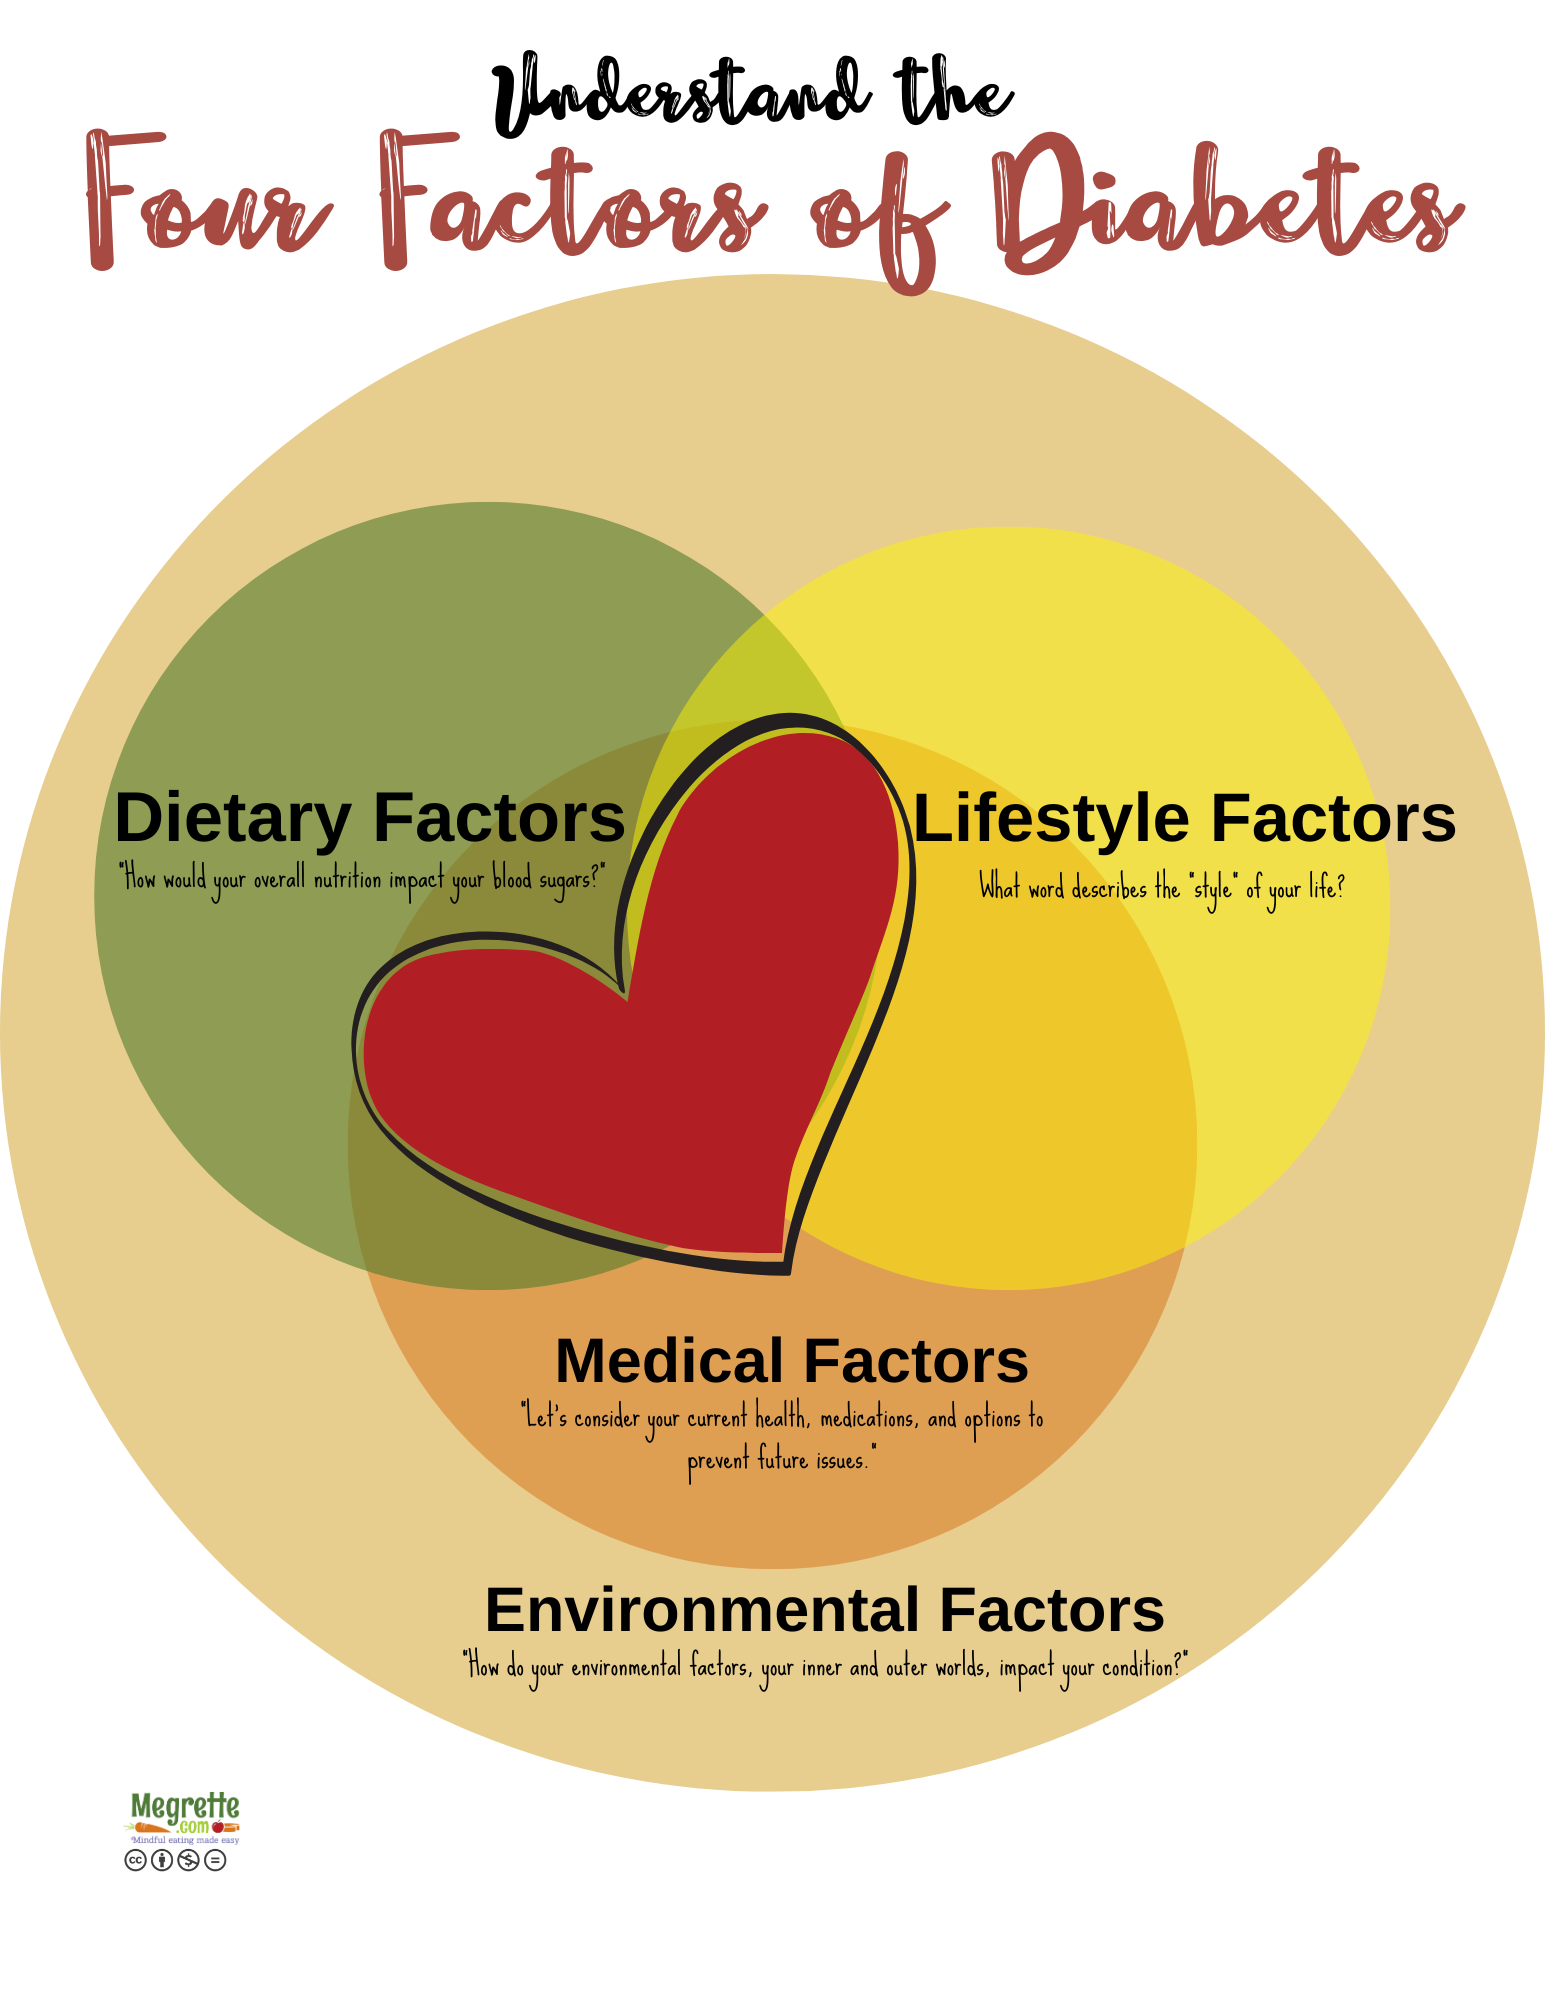 A Venn Diagram with Dietary, Lifestyle Medical and Environmental factors overlapping